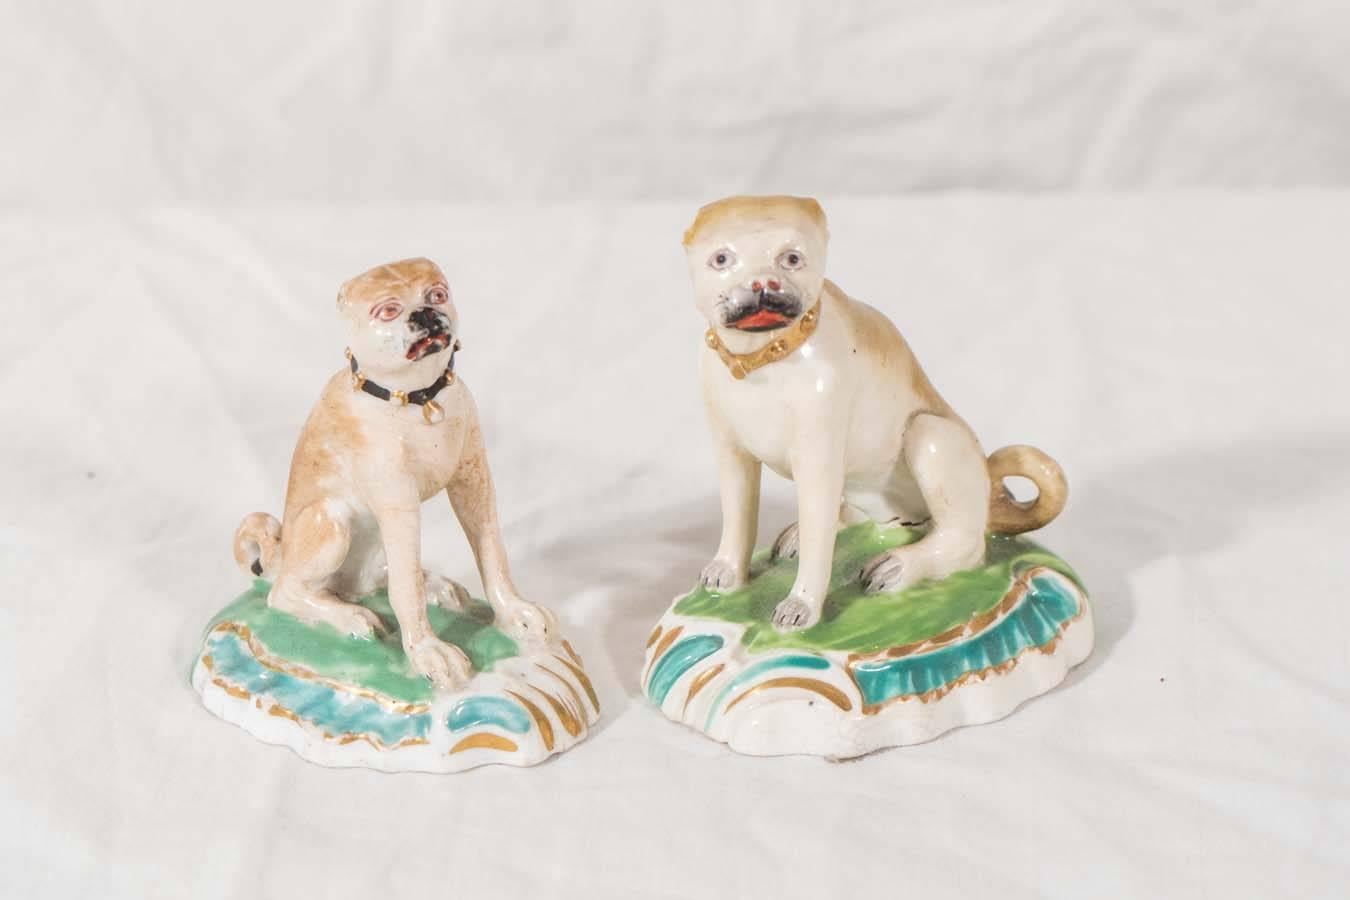 Two Derby Porcelain pugs, the smaller late 18th century and the larger early 19th century. The figures have expressive faces capturing the character of these charming canines Each is seated on scroll molded bases, painted in polychrome enamels. The